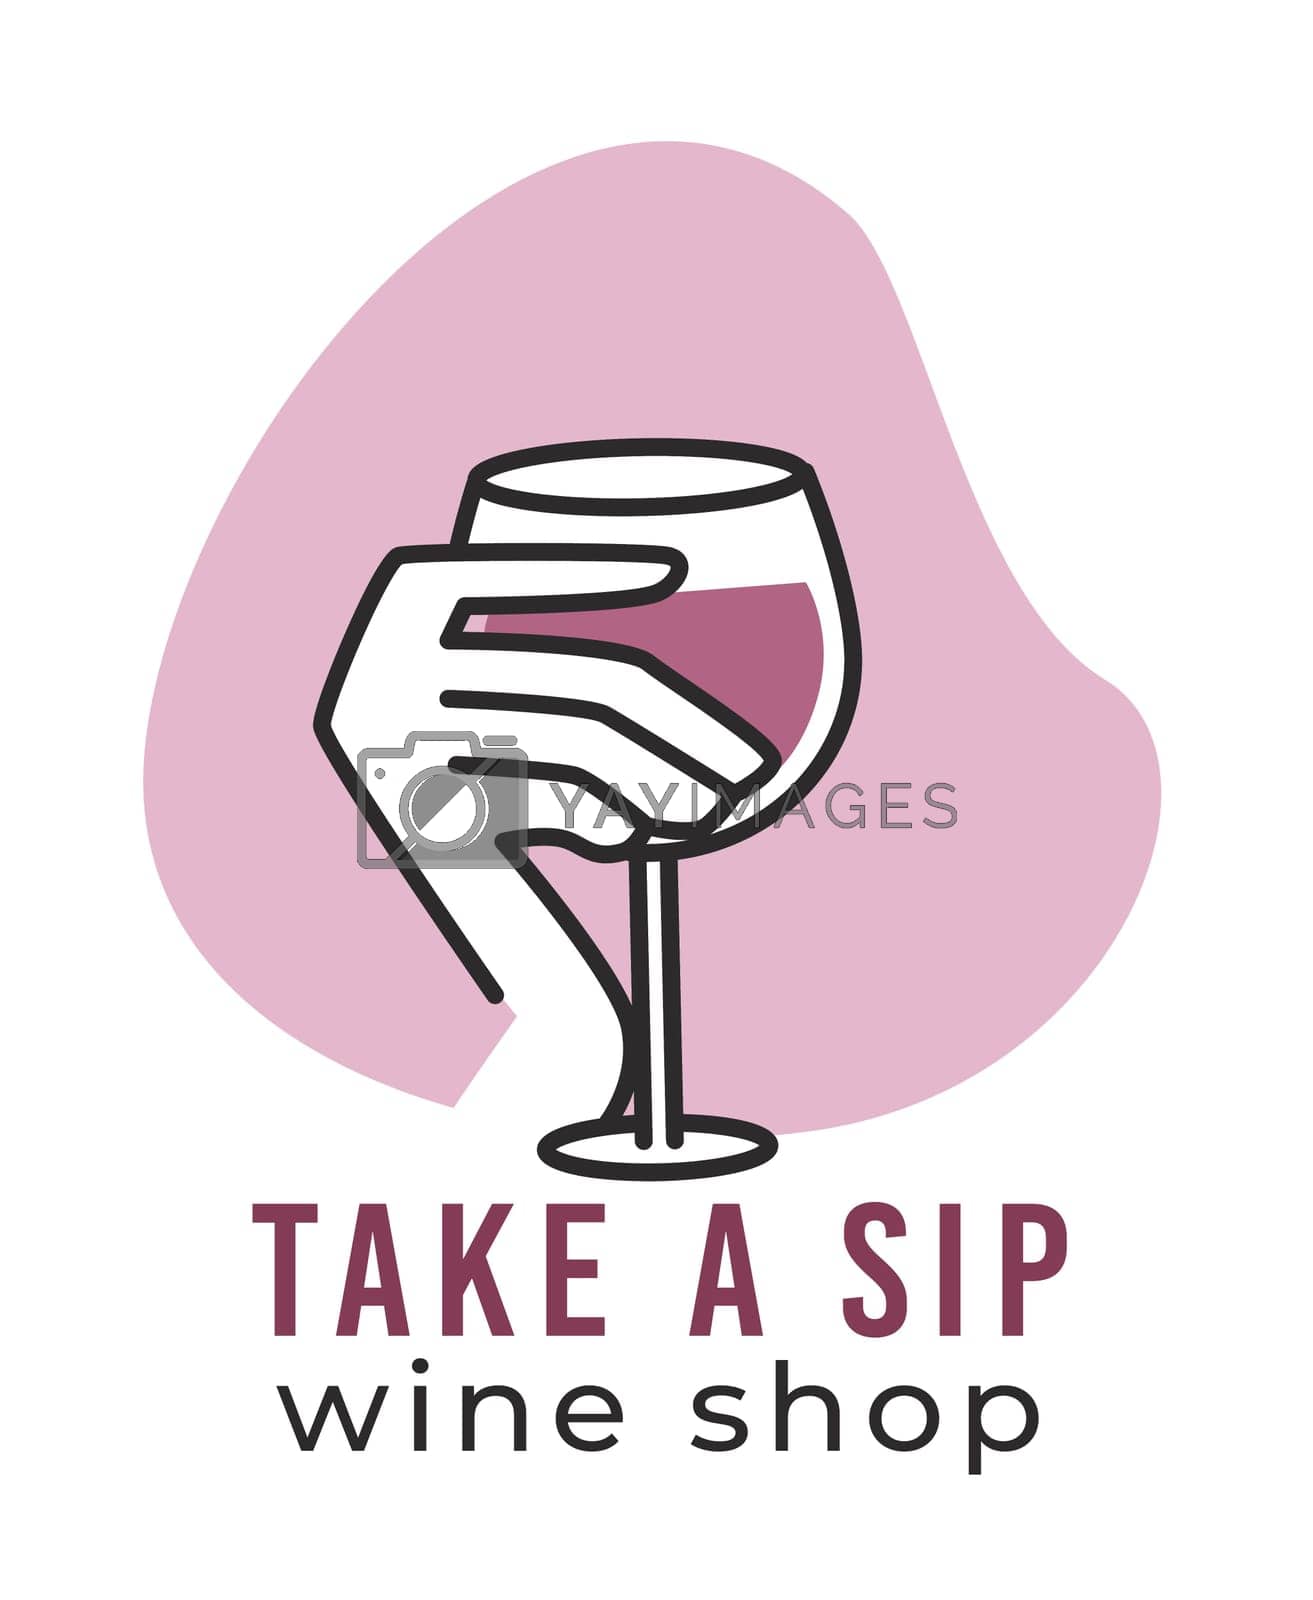 Royalty free image of Take a sip, wine shop tasting and degustation by Sonulkaster